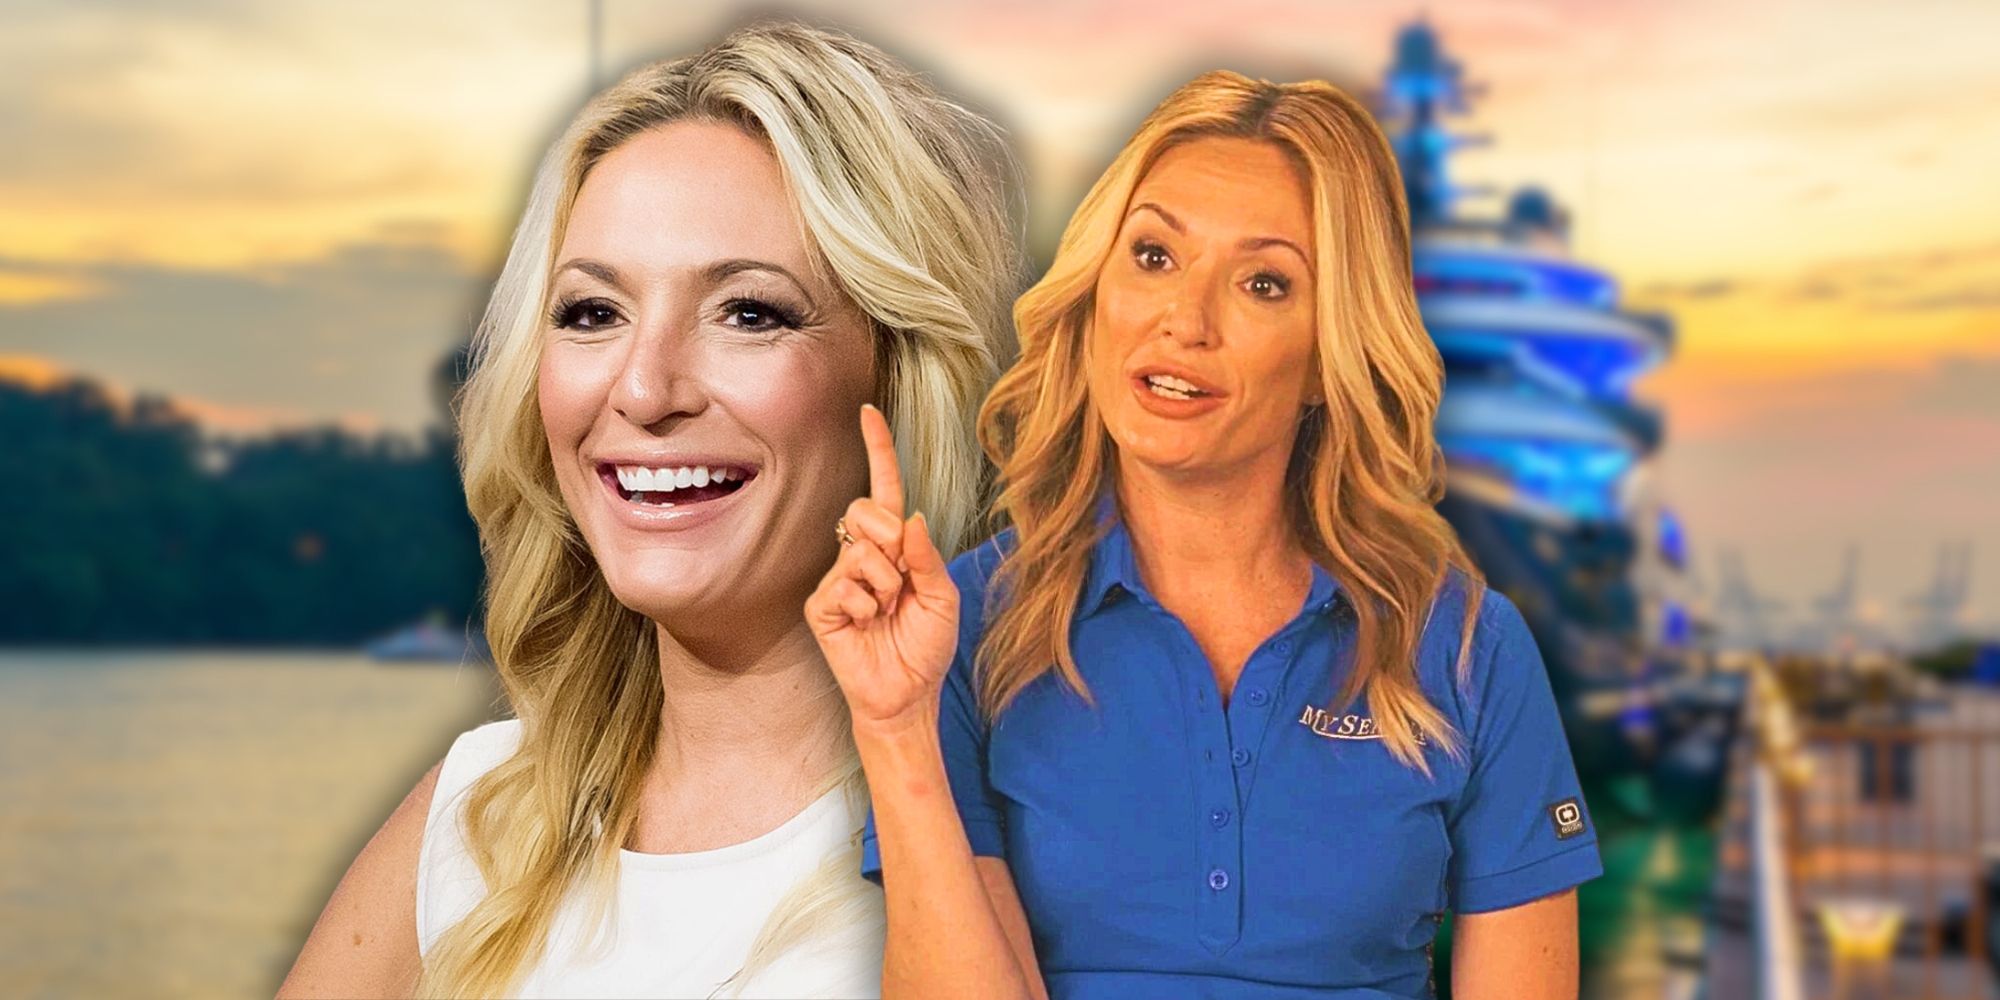 Below Deck’s Kate Chastain Reveals If She’s Open To Having A Second Baby